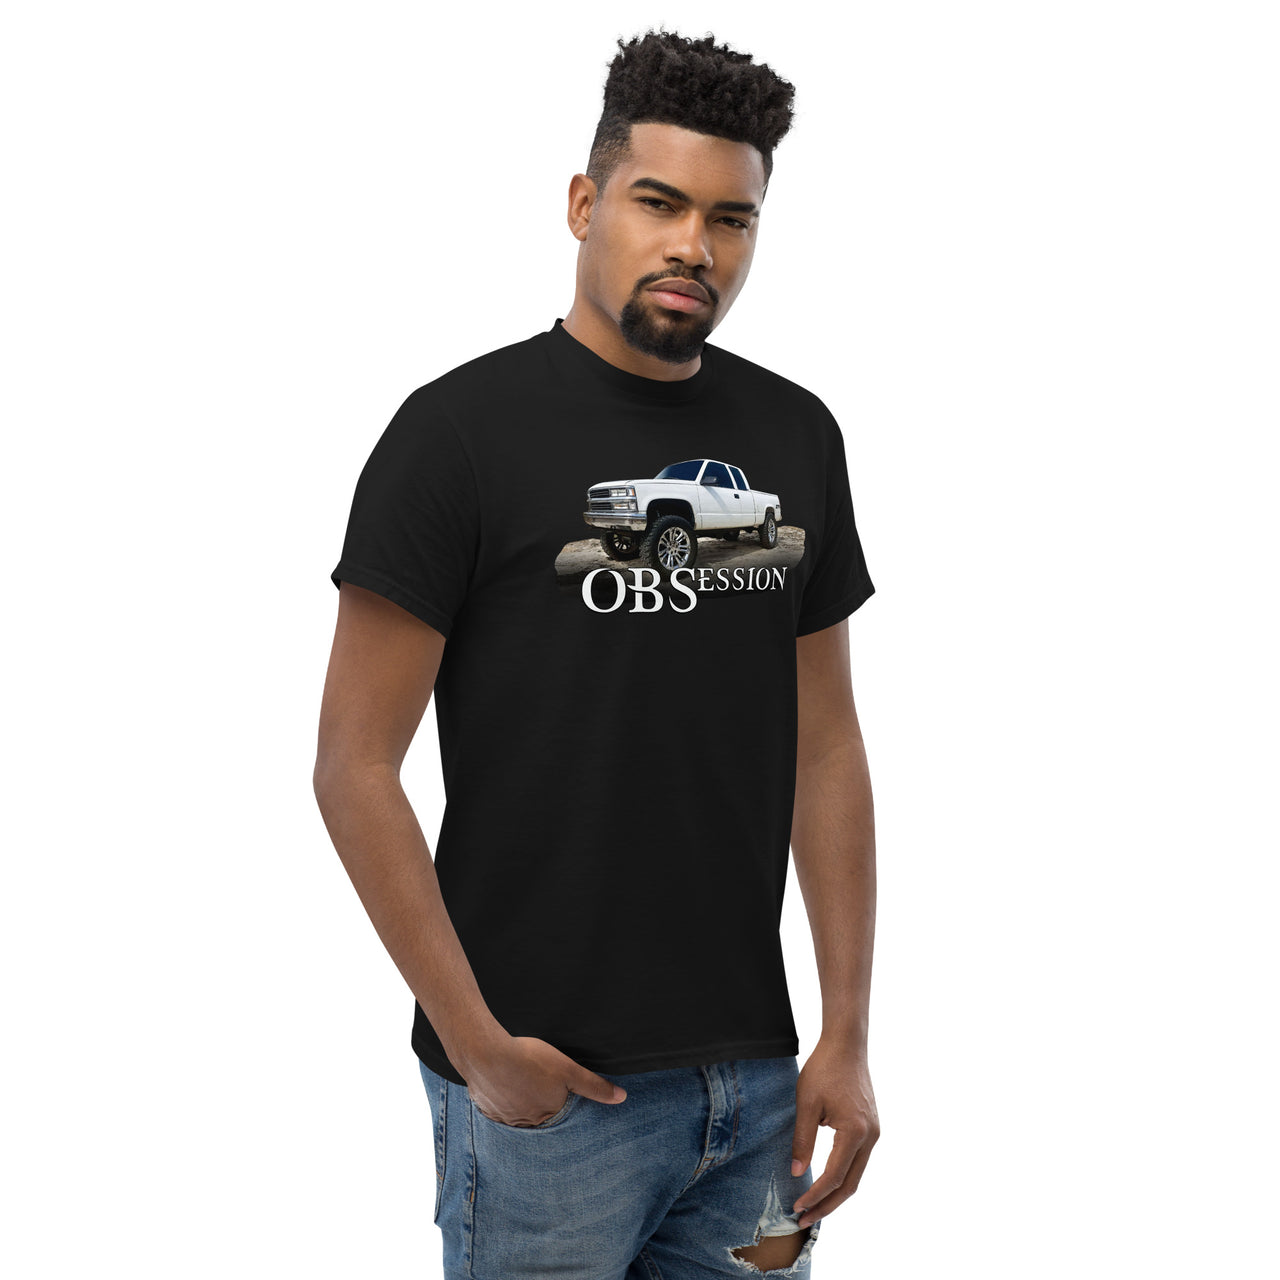 OBS Truck T-Shirt Lifted K1500 modeled In Black